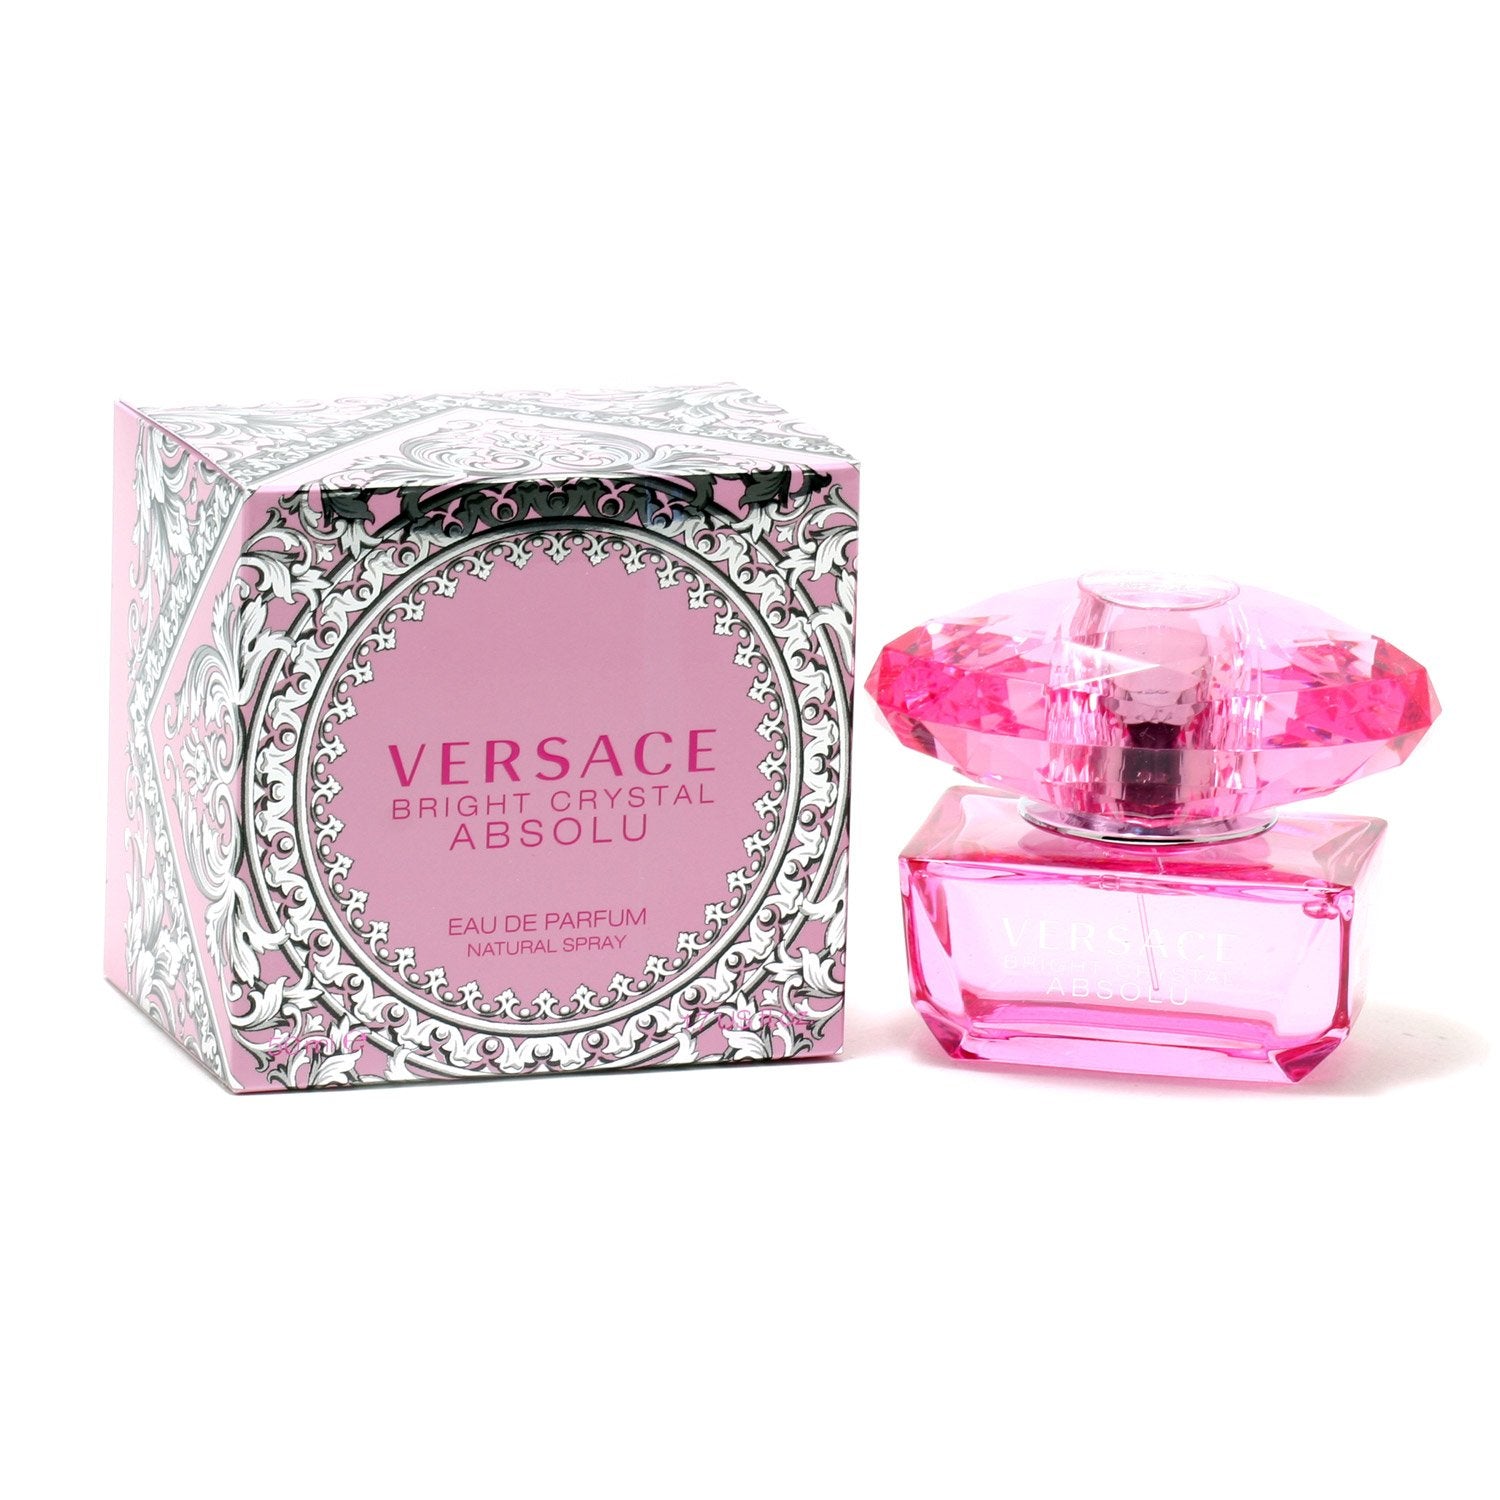 Versace - Woman » Reviews & Perfume Facts